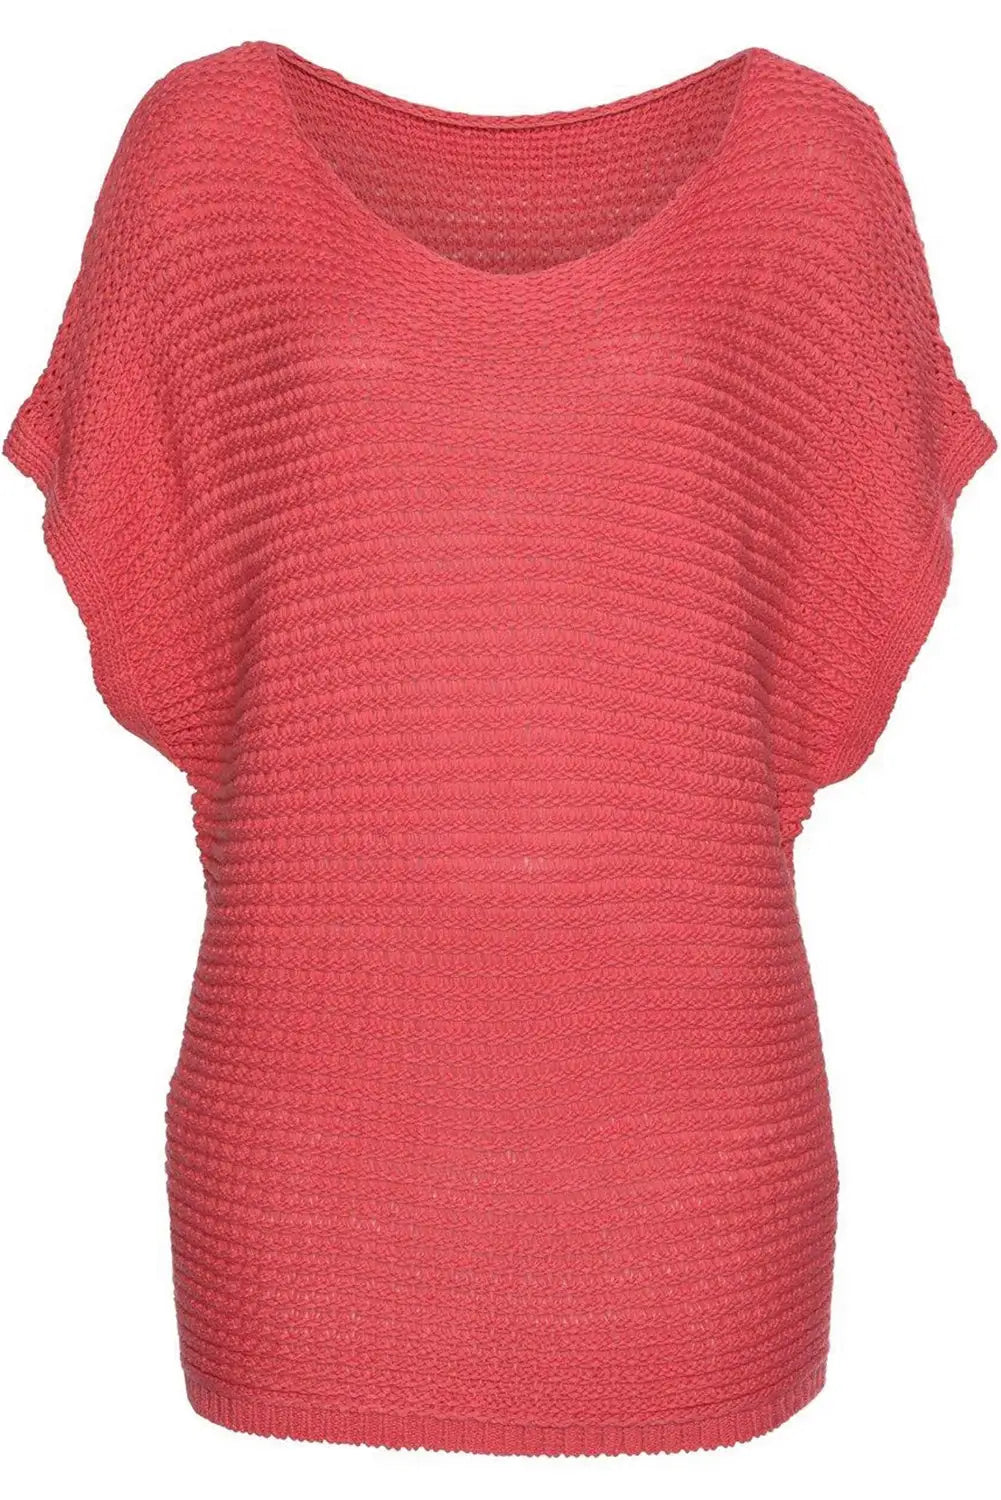 Red clay solid loose knit short dolman sleeve sweater - sweaters & cardigans